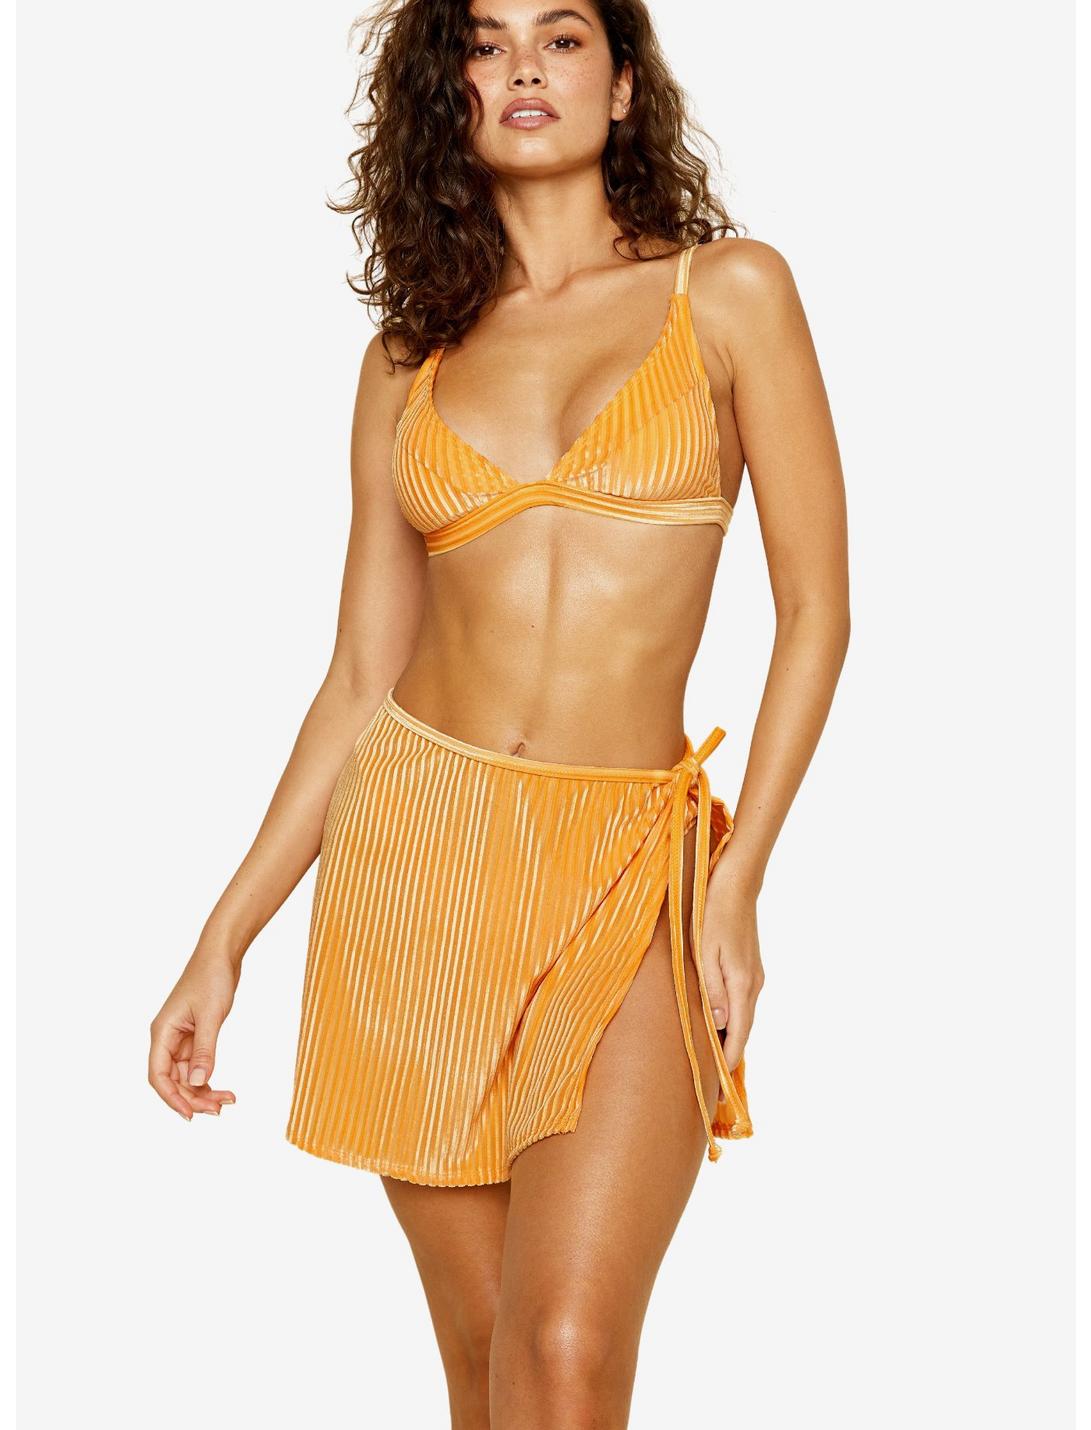 Dippin' Daisy's Aglow Adjustable Side Tie Swim Cover-Up Skirt Golden Hour, ORANGE, hi-res